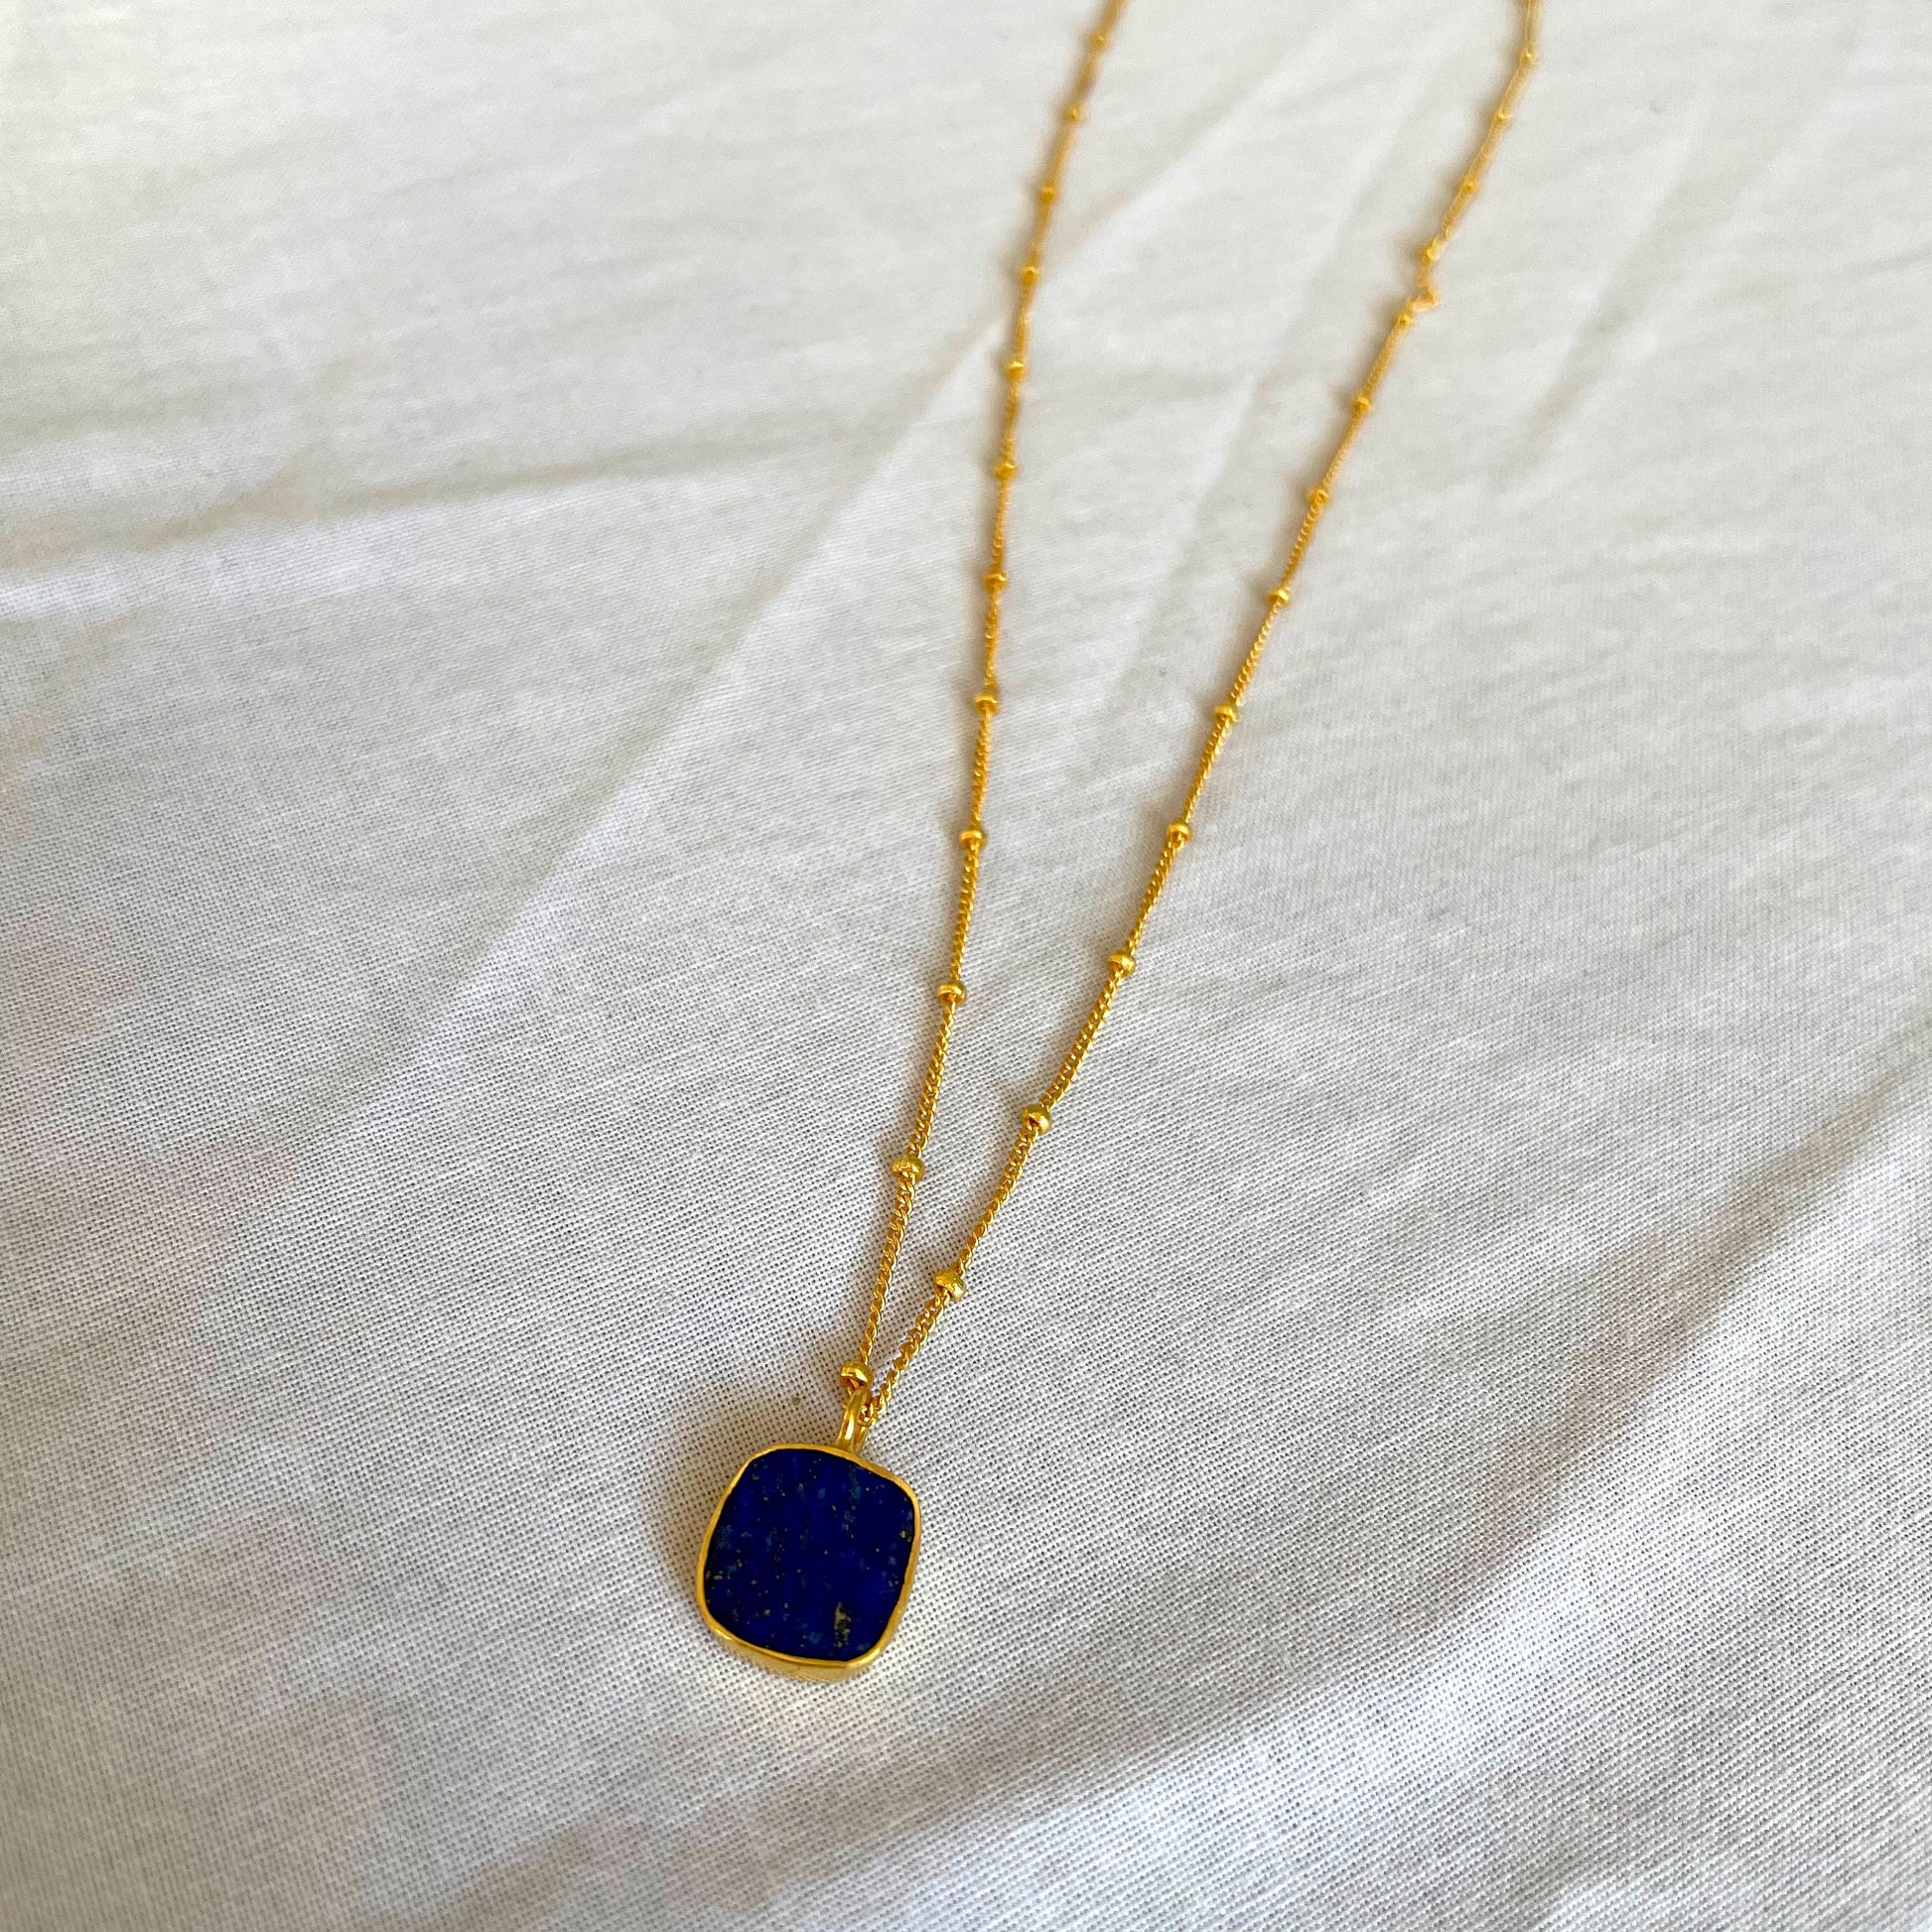 Lapis Lazuli Necklace, Gold Plated on 925 Sterling Silver, handmade gemstone necklace by Brinda, Unique Gift for her, Unique necklace, gemstones, gold, chain, Crystal, trending, mothers day gift, small business, london, dainty necklace, lapis lazuli